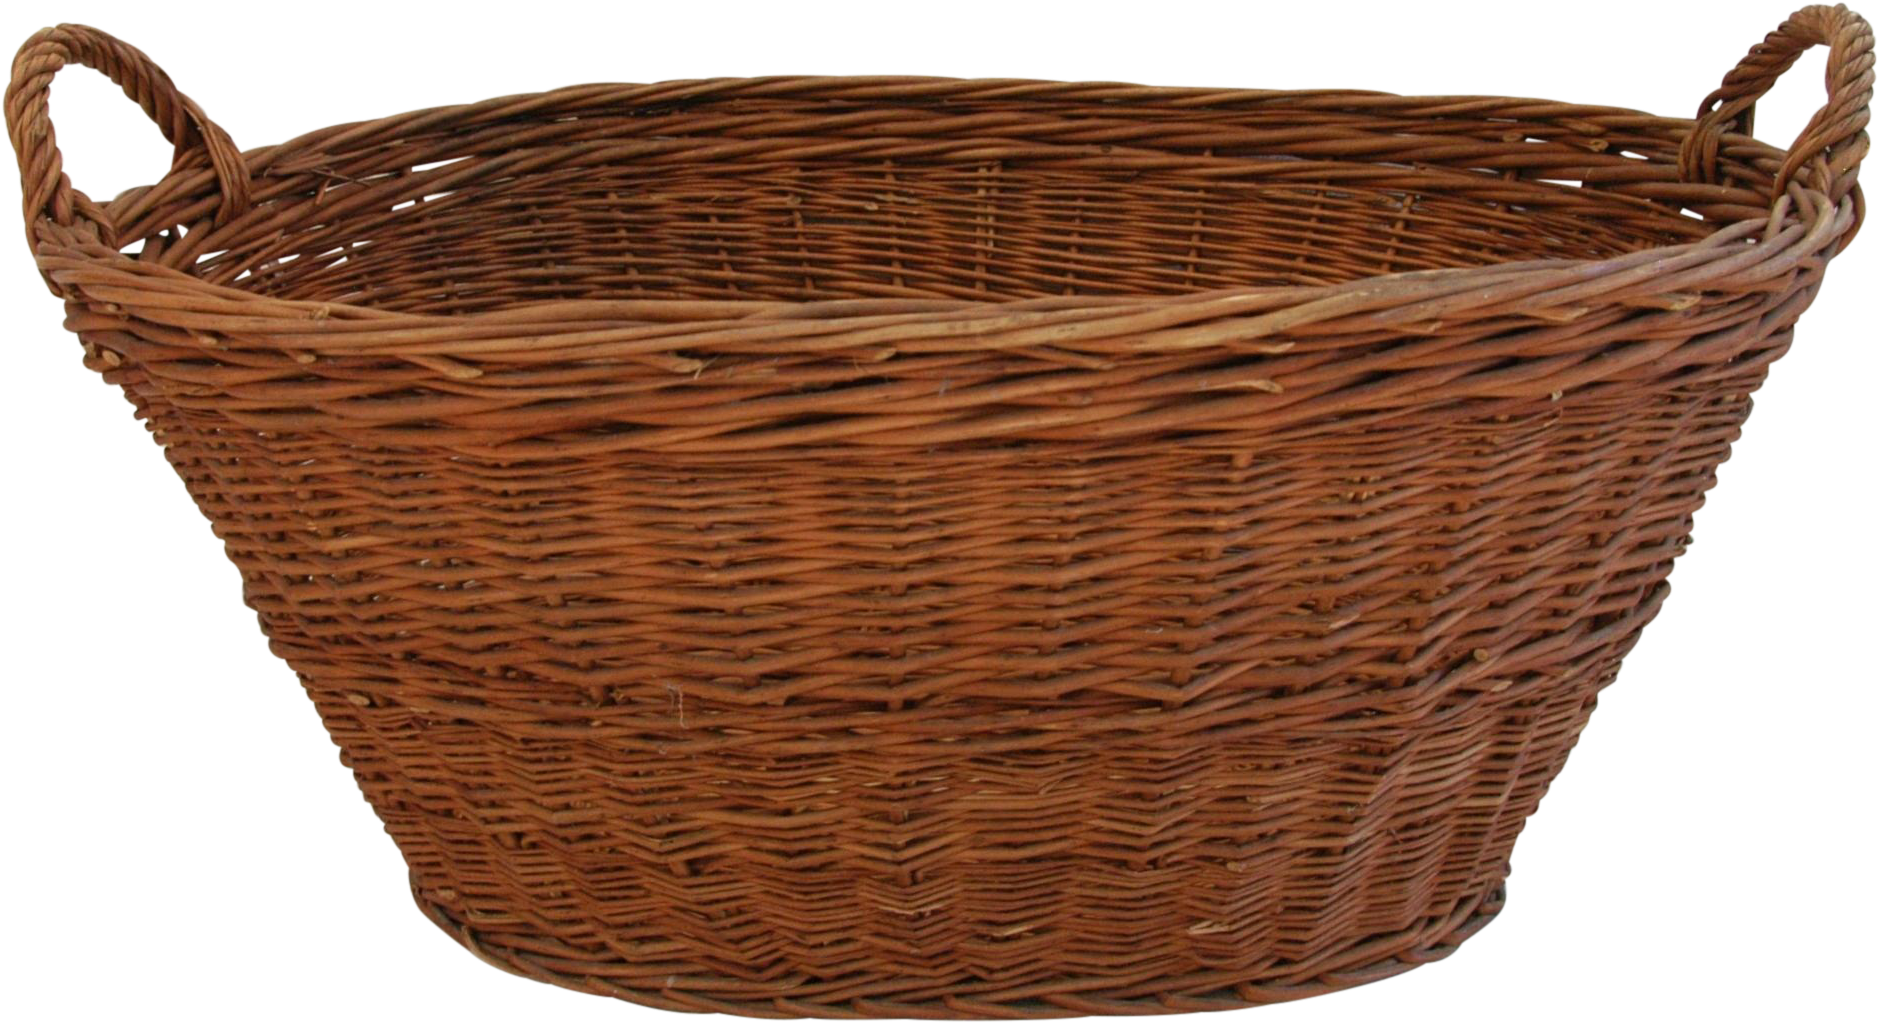 Woven Wicker Basket Isolated PNG